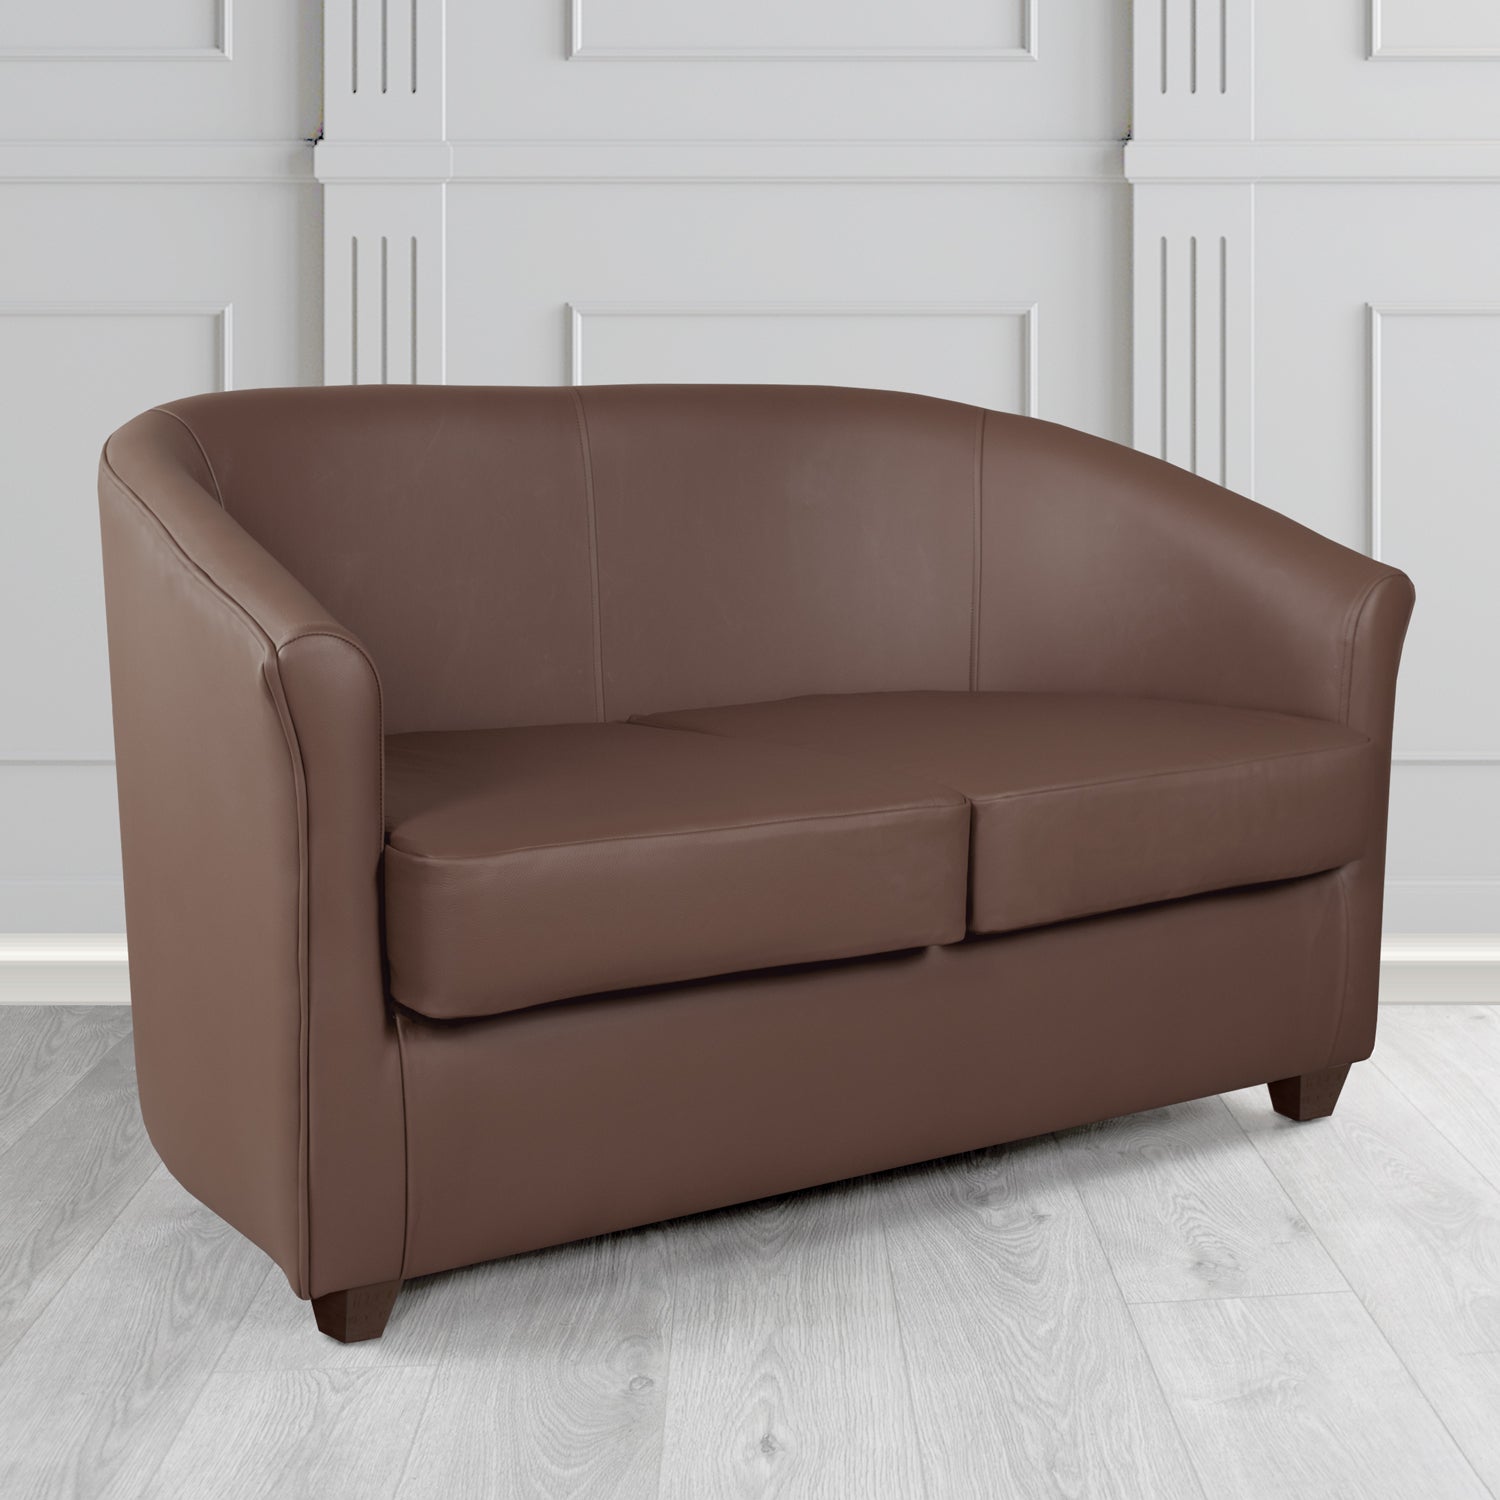 Cannes 2 Seater Tub Sofa in Just Colour Cocoa Crib 5 Faux Leather - The Tub Chair Shop